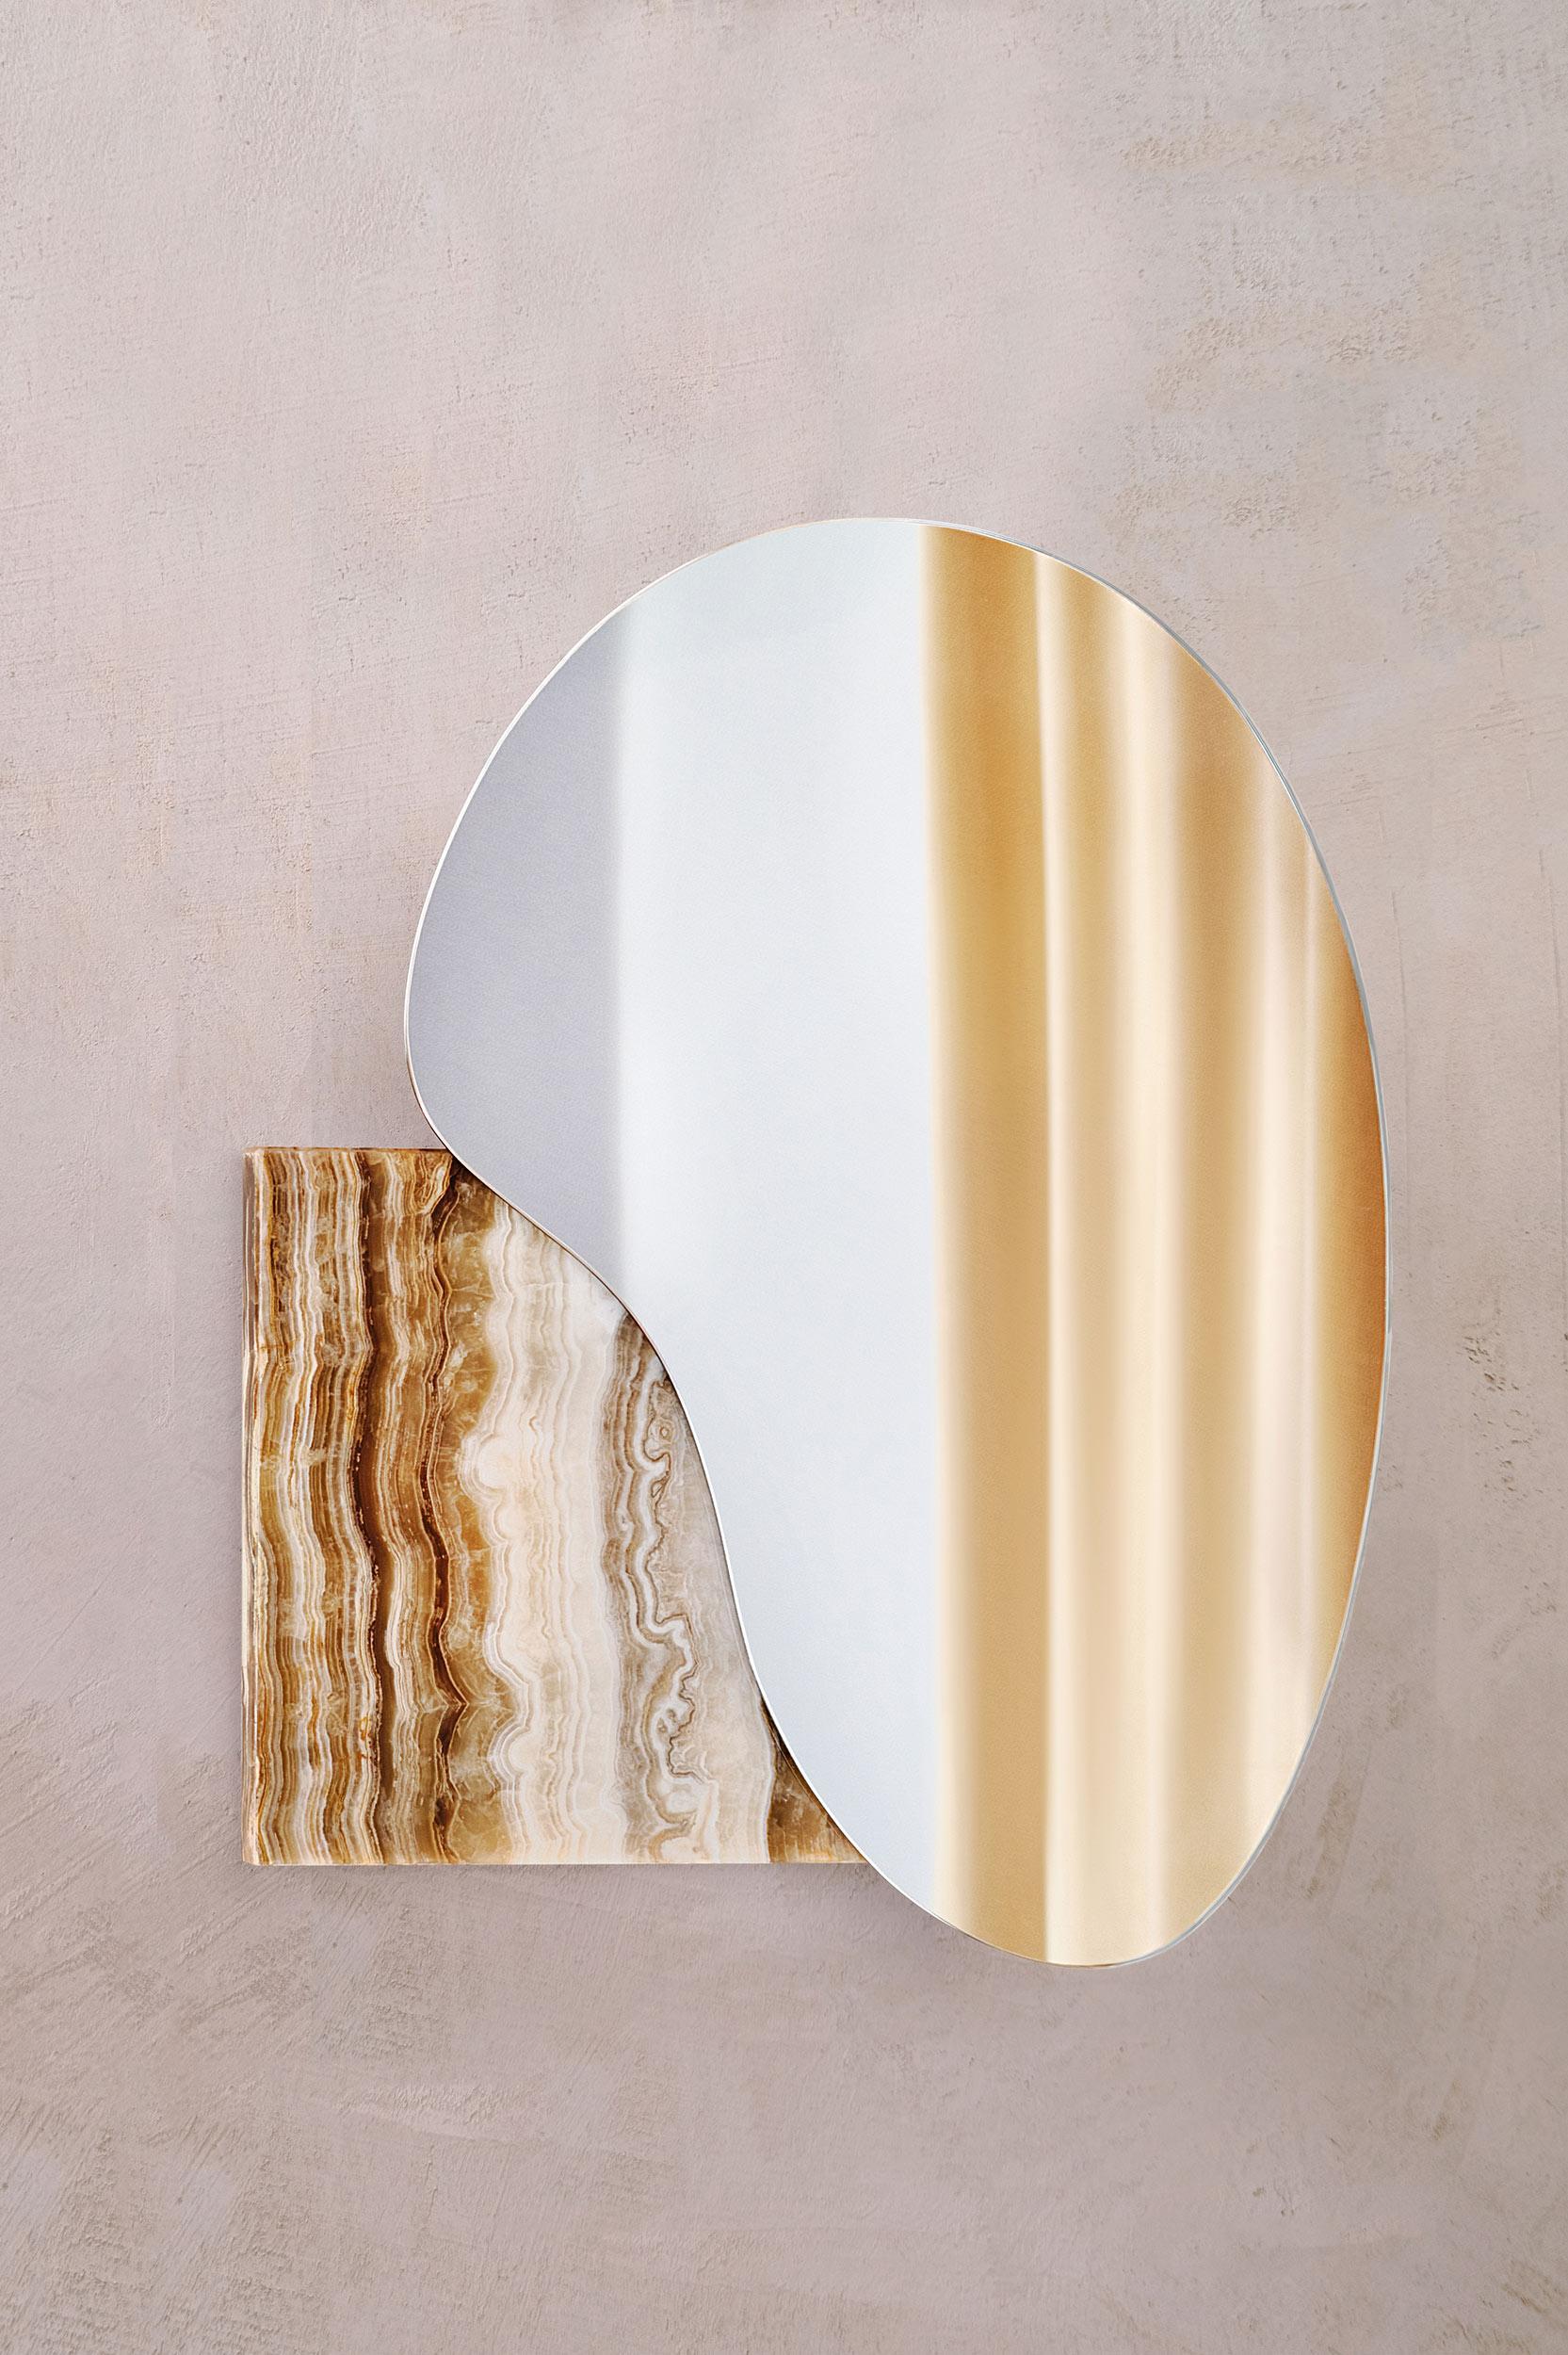 Painted Contemporary Wall Mirror Lake 4 by Noom, Madrone Wood For Sale